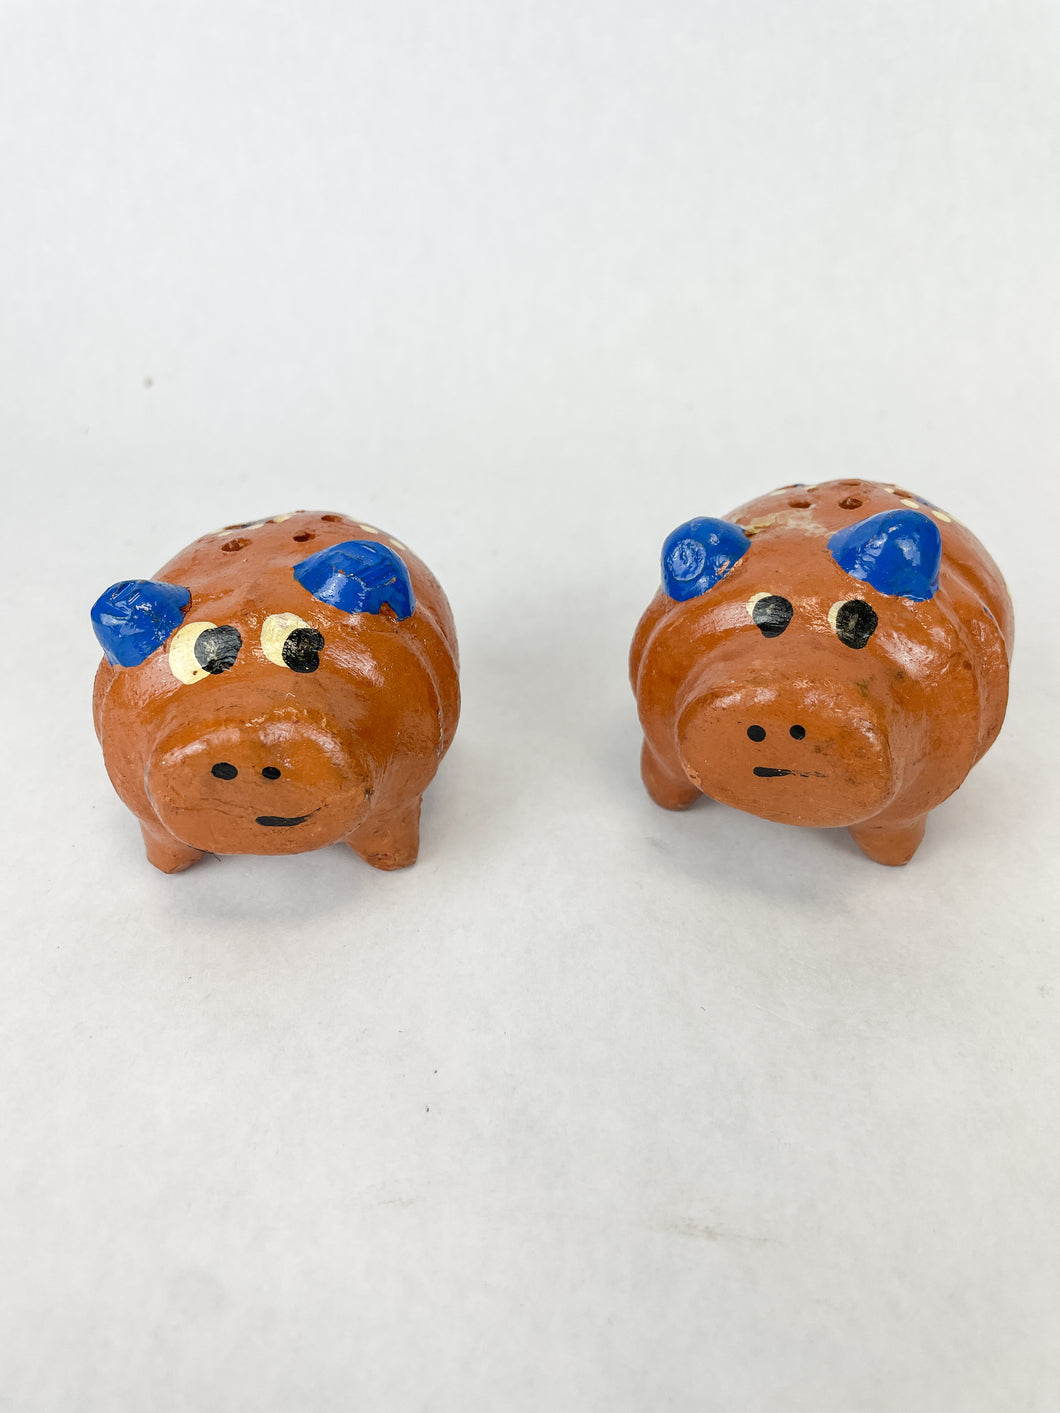 Michoacan Mexican Clay Salt And Pepper Marranitos Shakers Piggies Puerquitos Set of 2